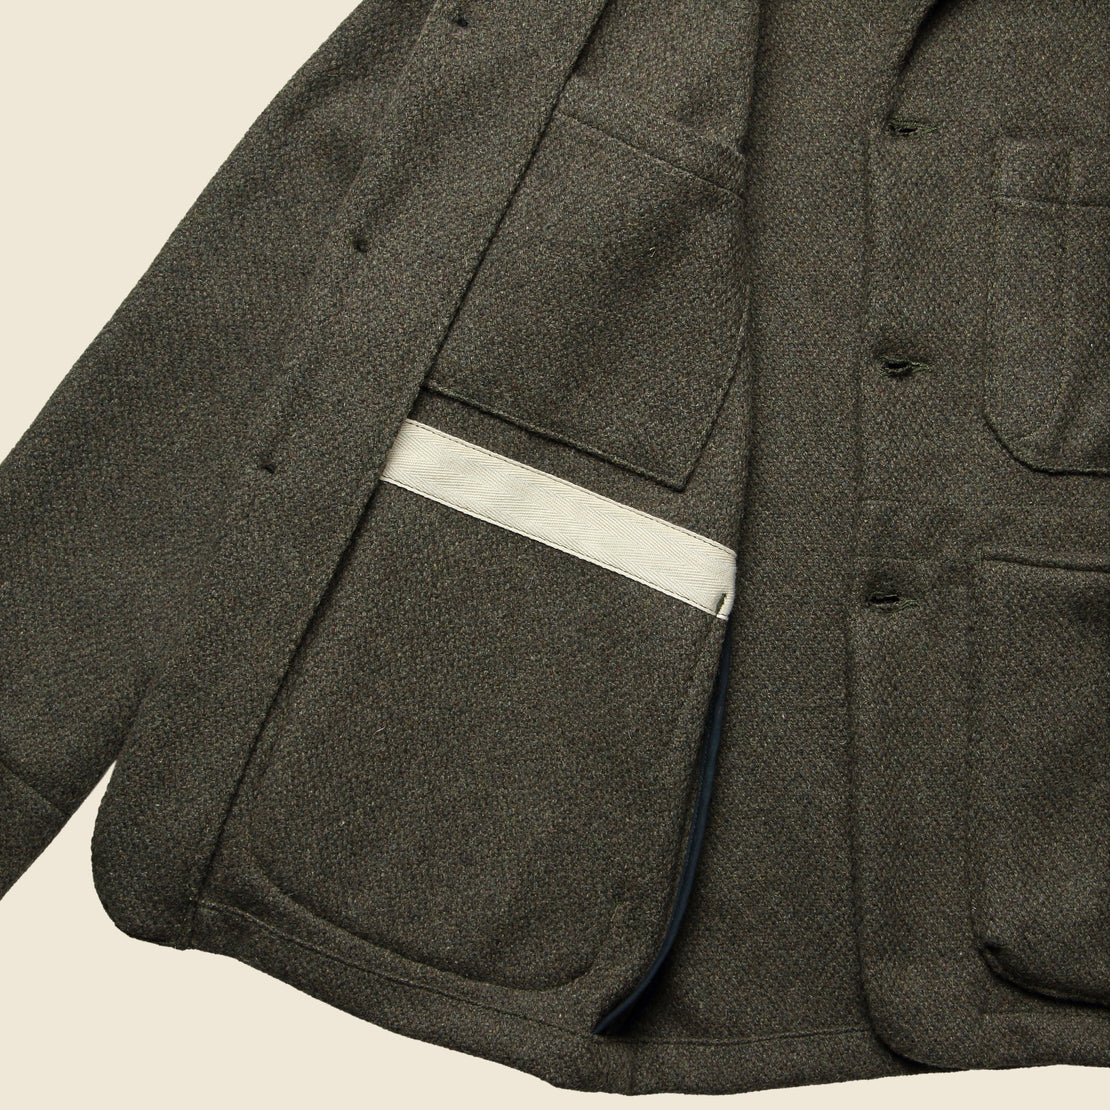 Pine Blended Wool Explorer Blazer - Olive - Rogue Territory - STAG Provisions - Outerwear - Coat / Jacket